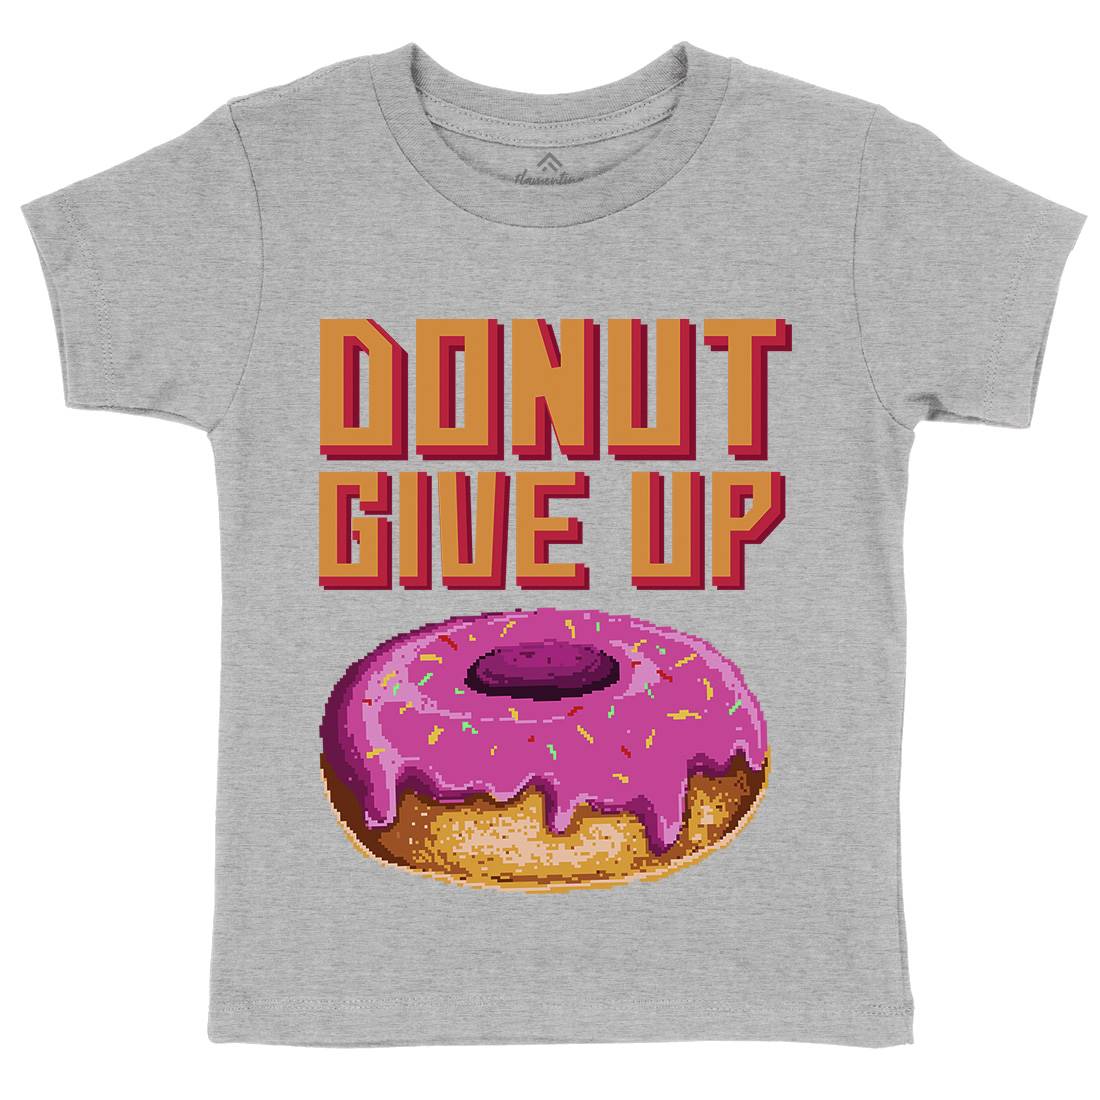 Donut Give Up Kids Crew Neck T-Shirt Food B895